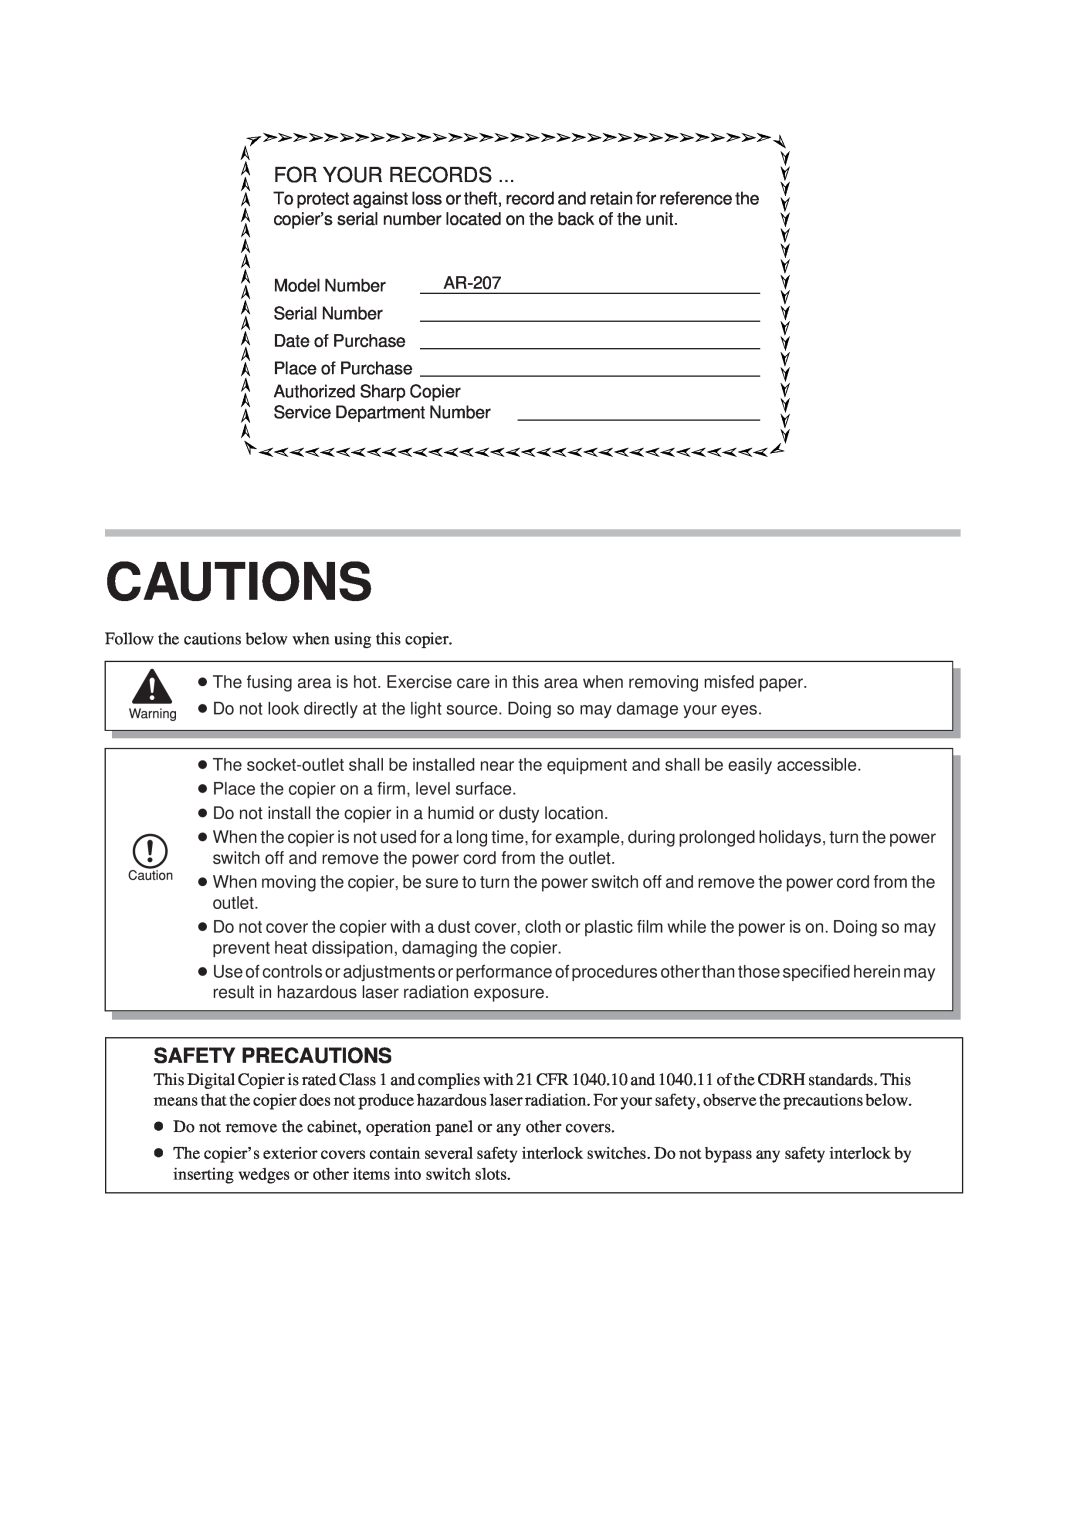 Sharp AR-207 operation manual Cautions, For Your Records, Safety Precautions 